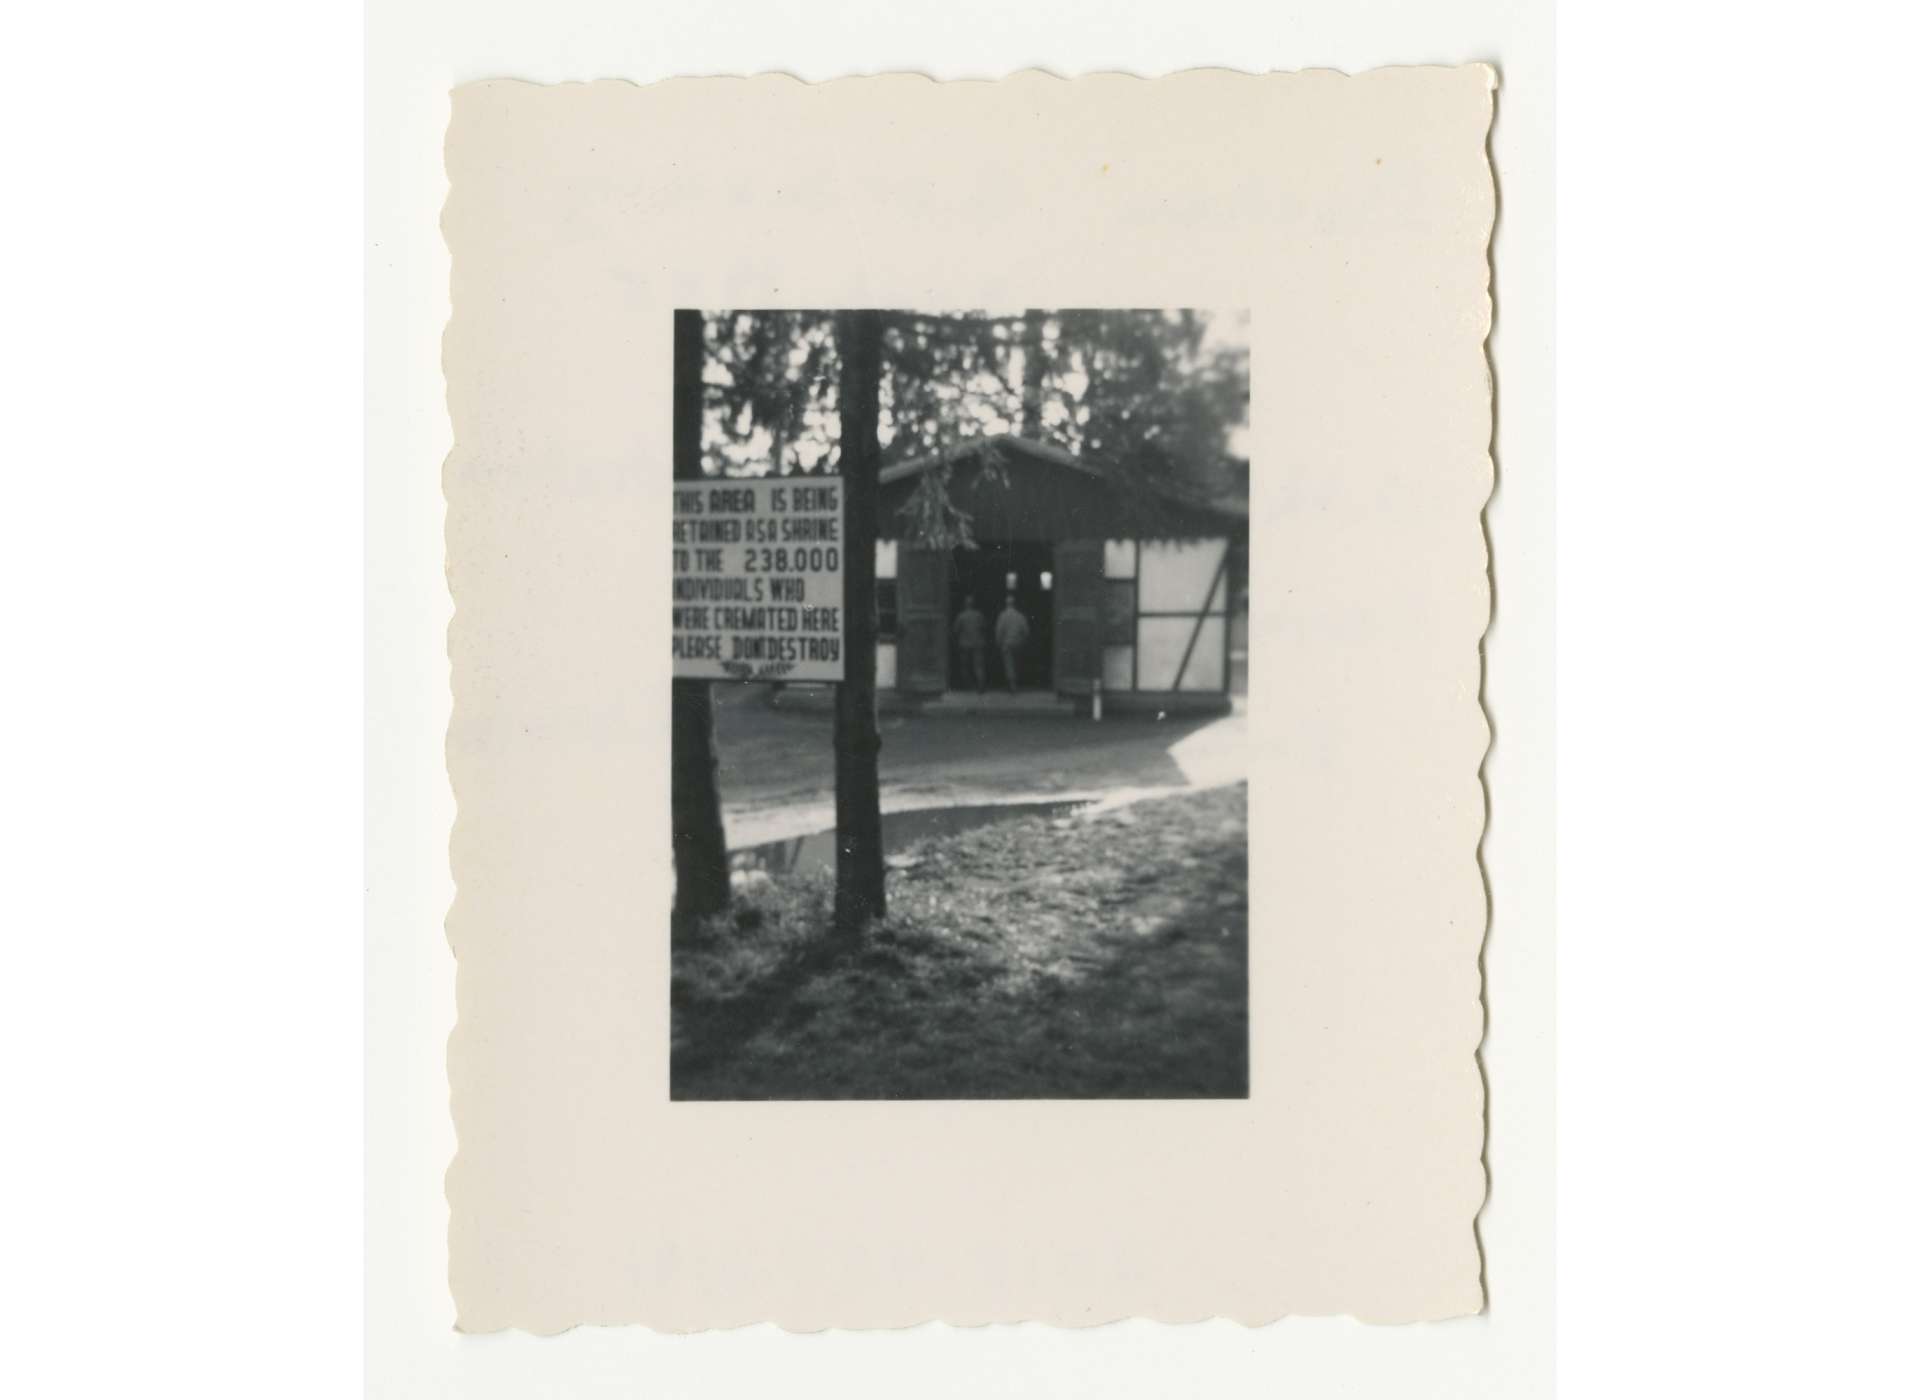 US personnel enter the gas chamber at Dachau. The sign with death statistics in the foreground is not correct. Over 41,000 people perished at Dachau. US Army Signal Corps Photo, Gift in Memory of Jack Hershkowitz, from the Collection of The National World War II Museum, 2015.457.114.